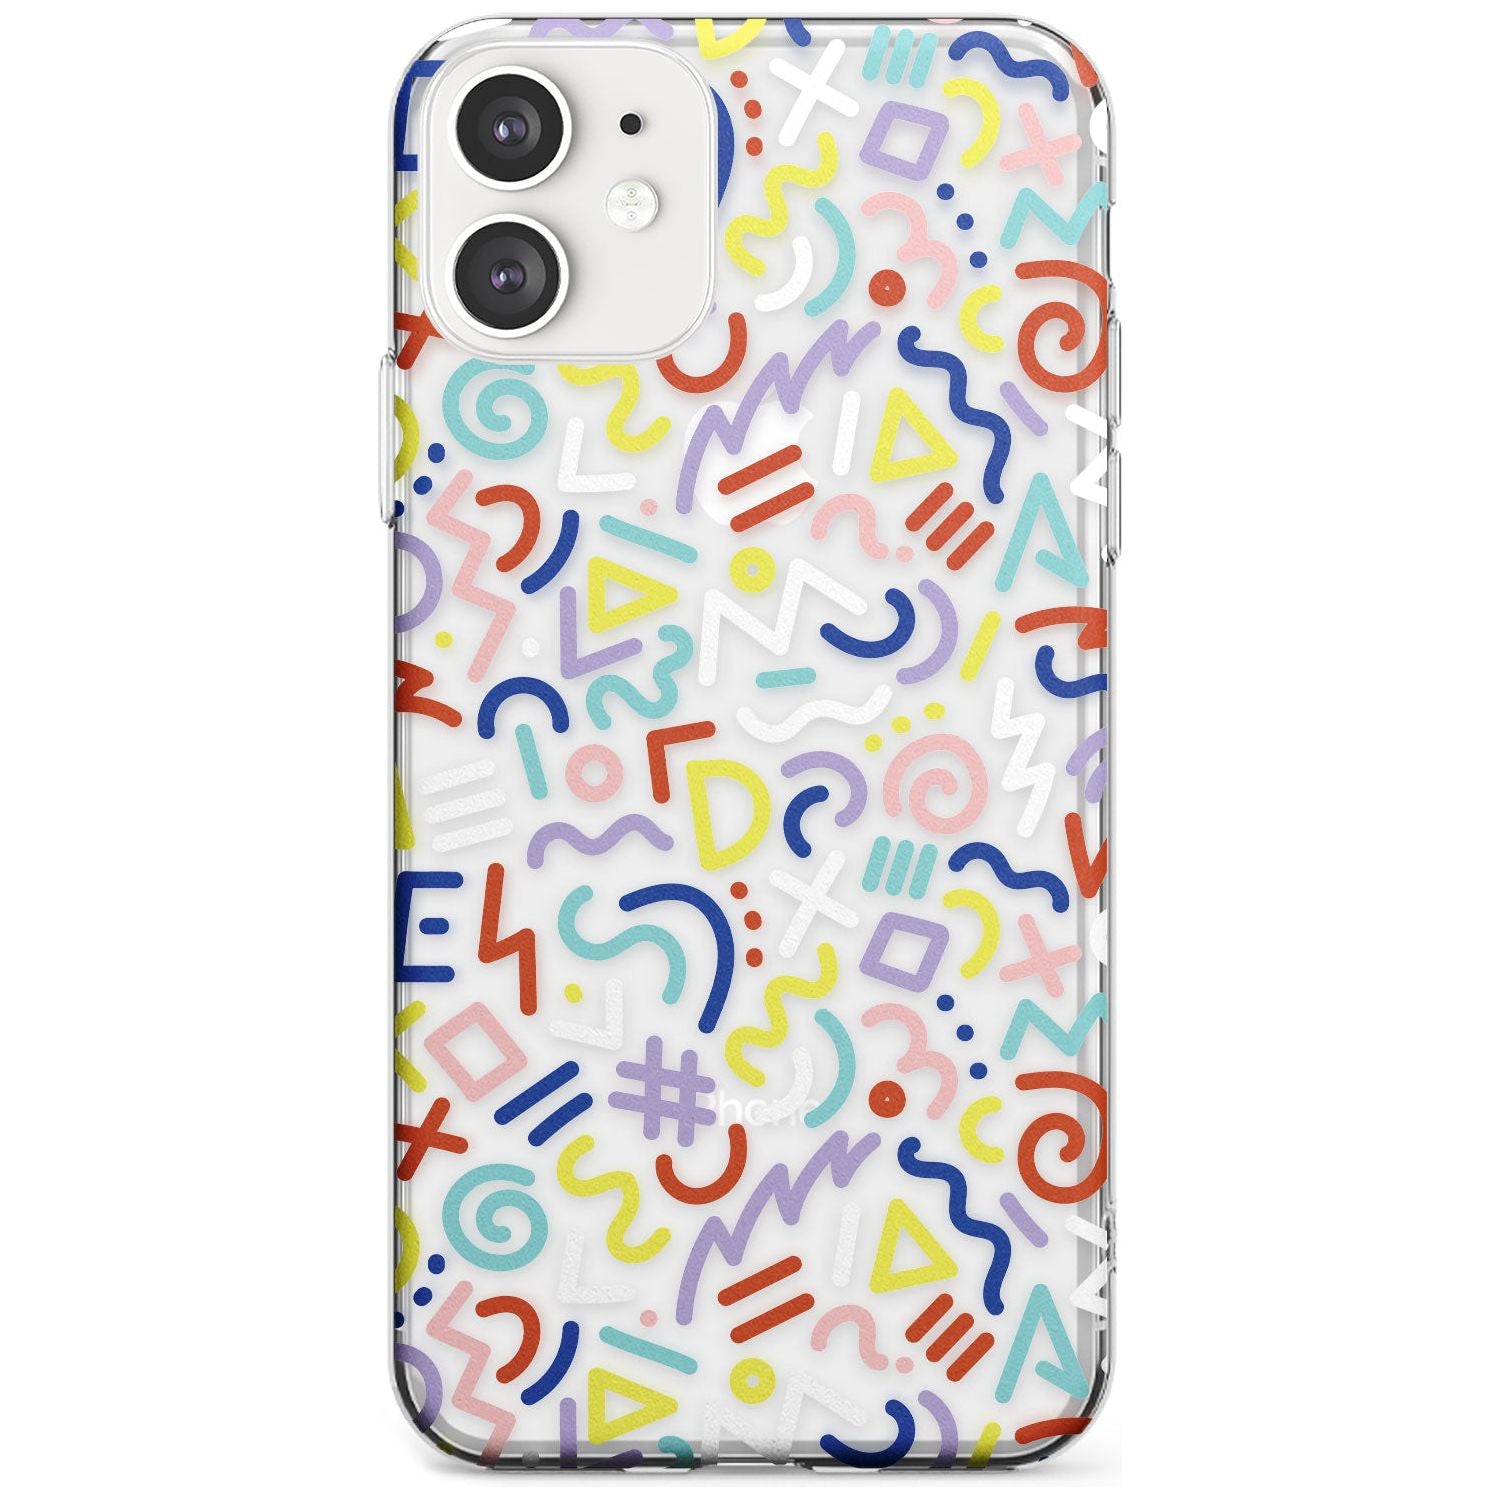 Colourful Mixed Shapes Retro Pattern Design Slim TPU Phone Case for iPhone 11